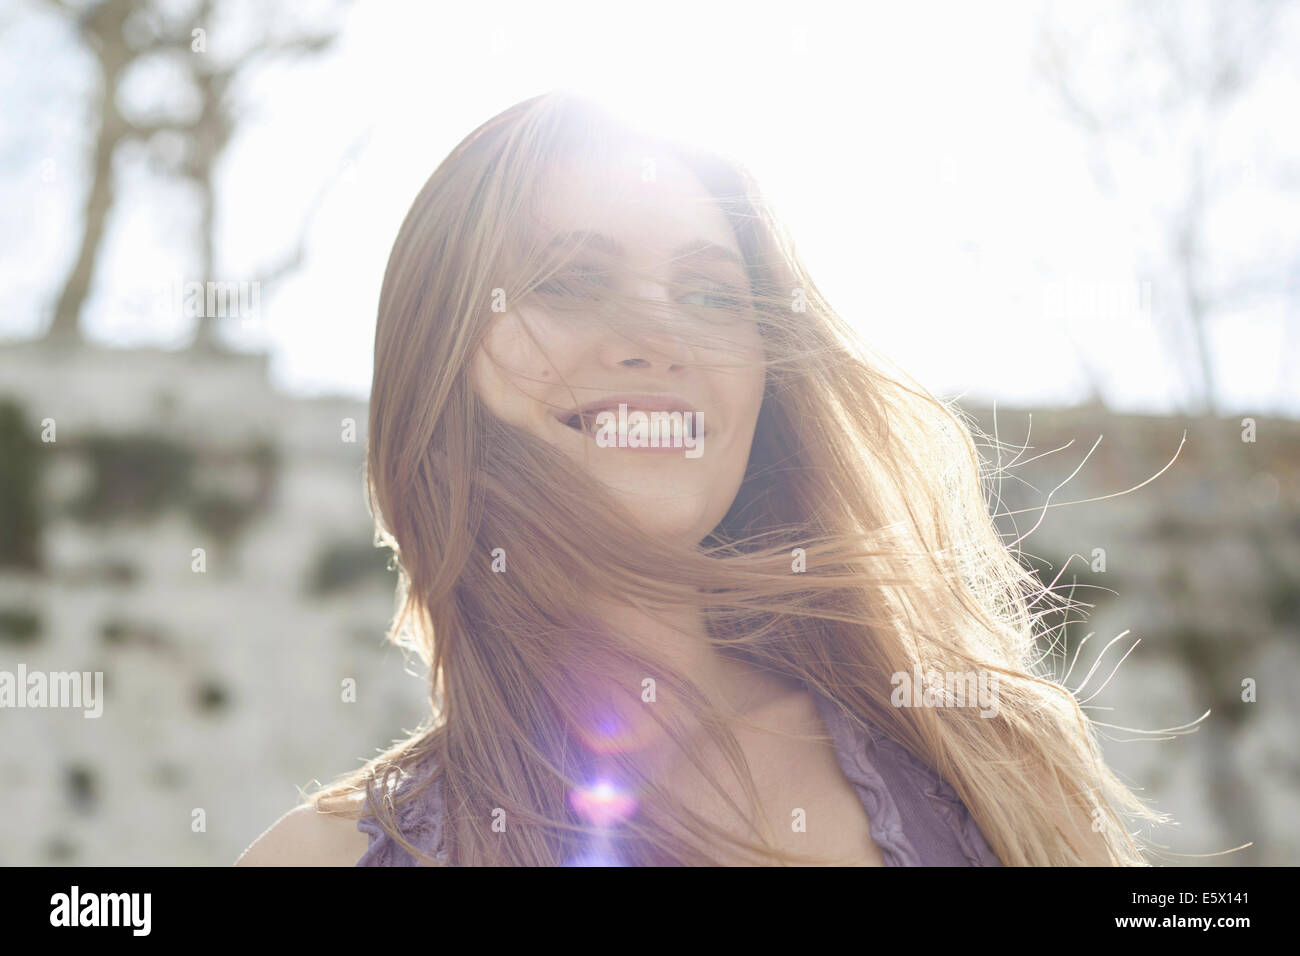 Happy young woman in sunlight, hair blowing over face Stock Photo